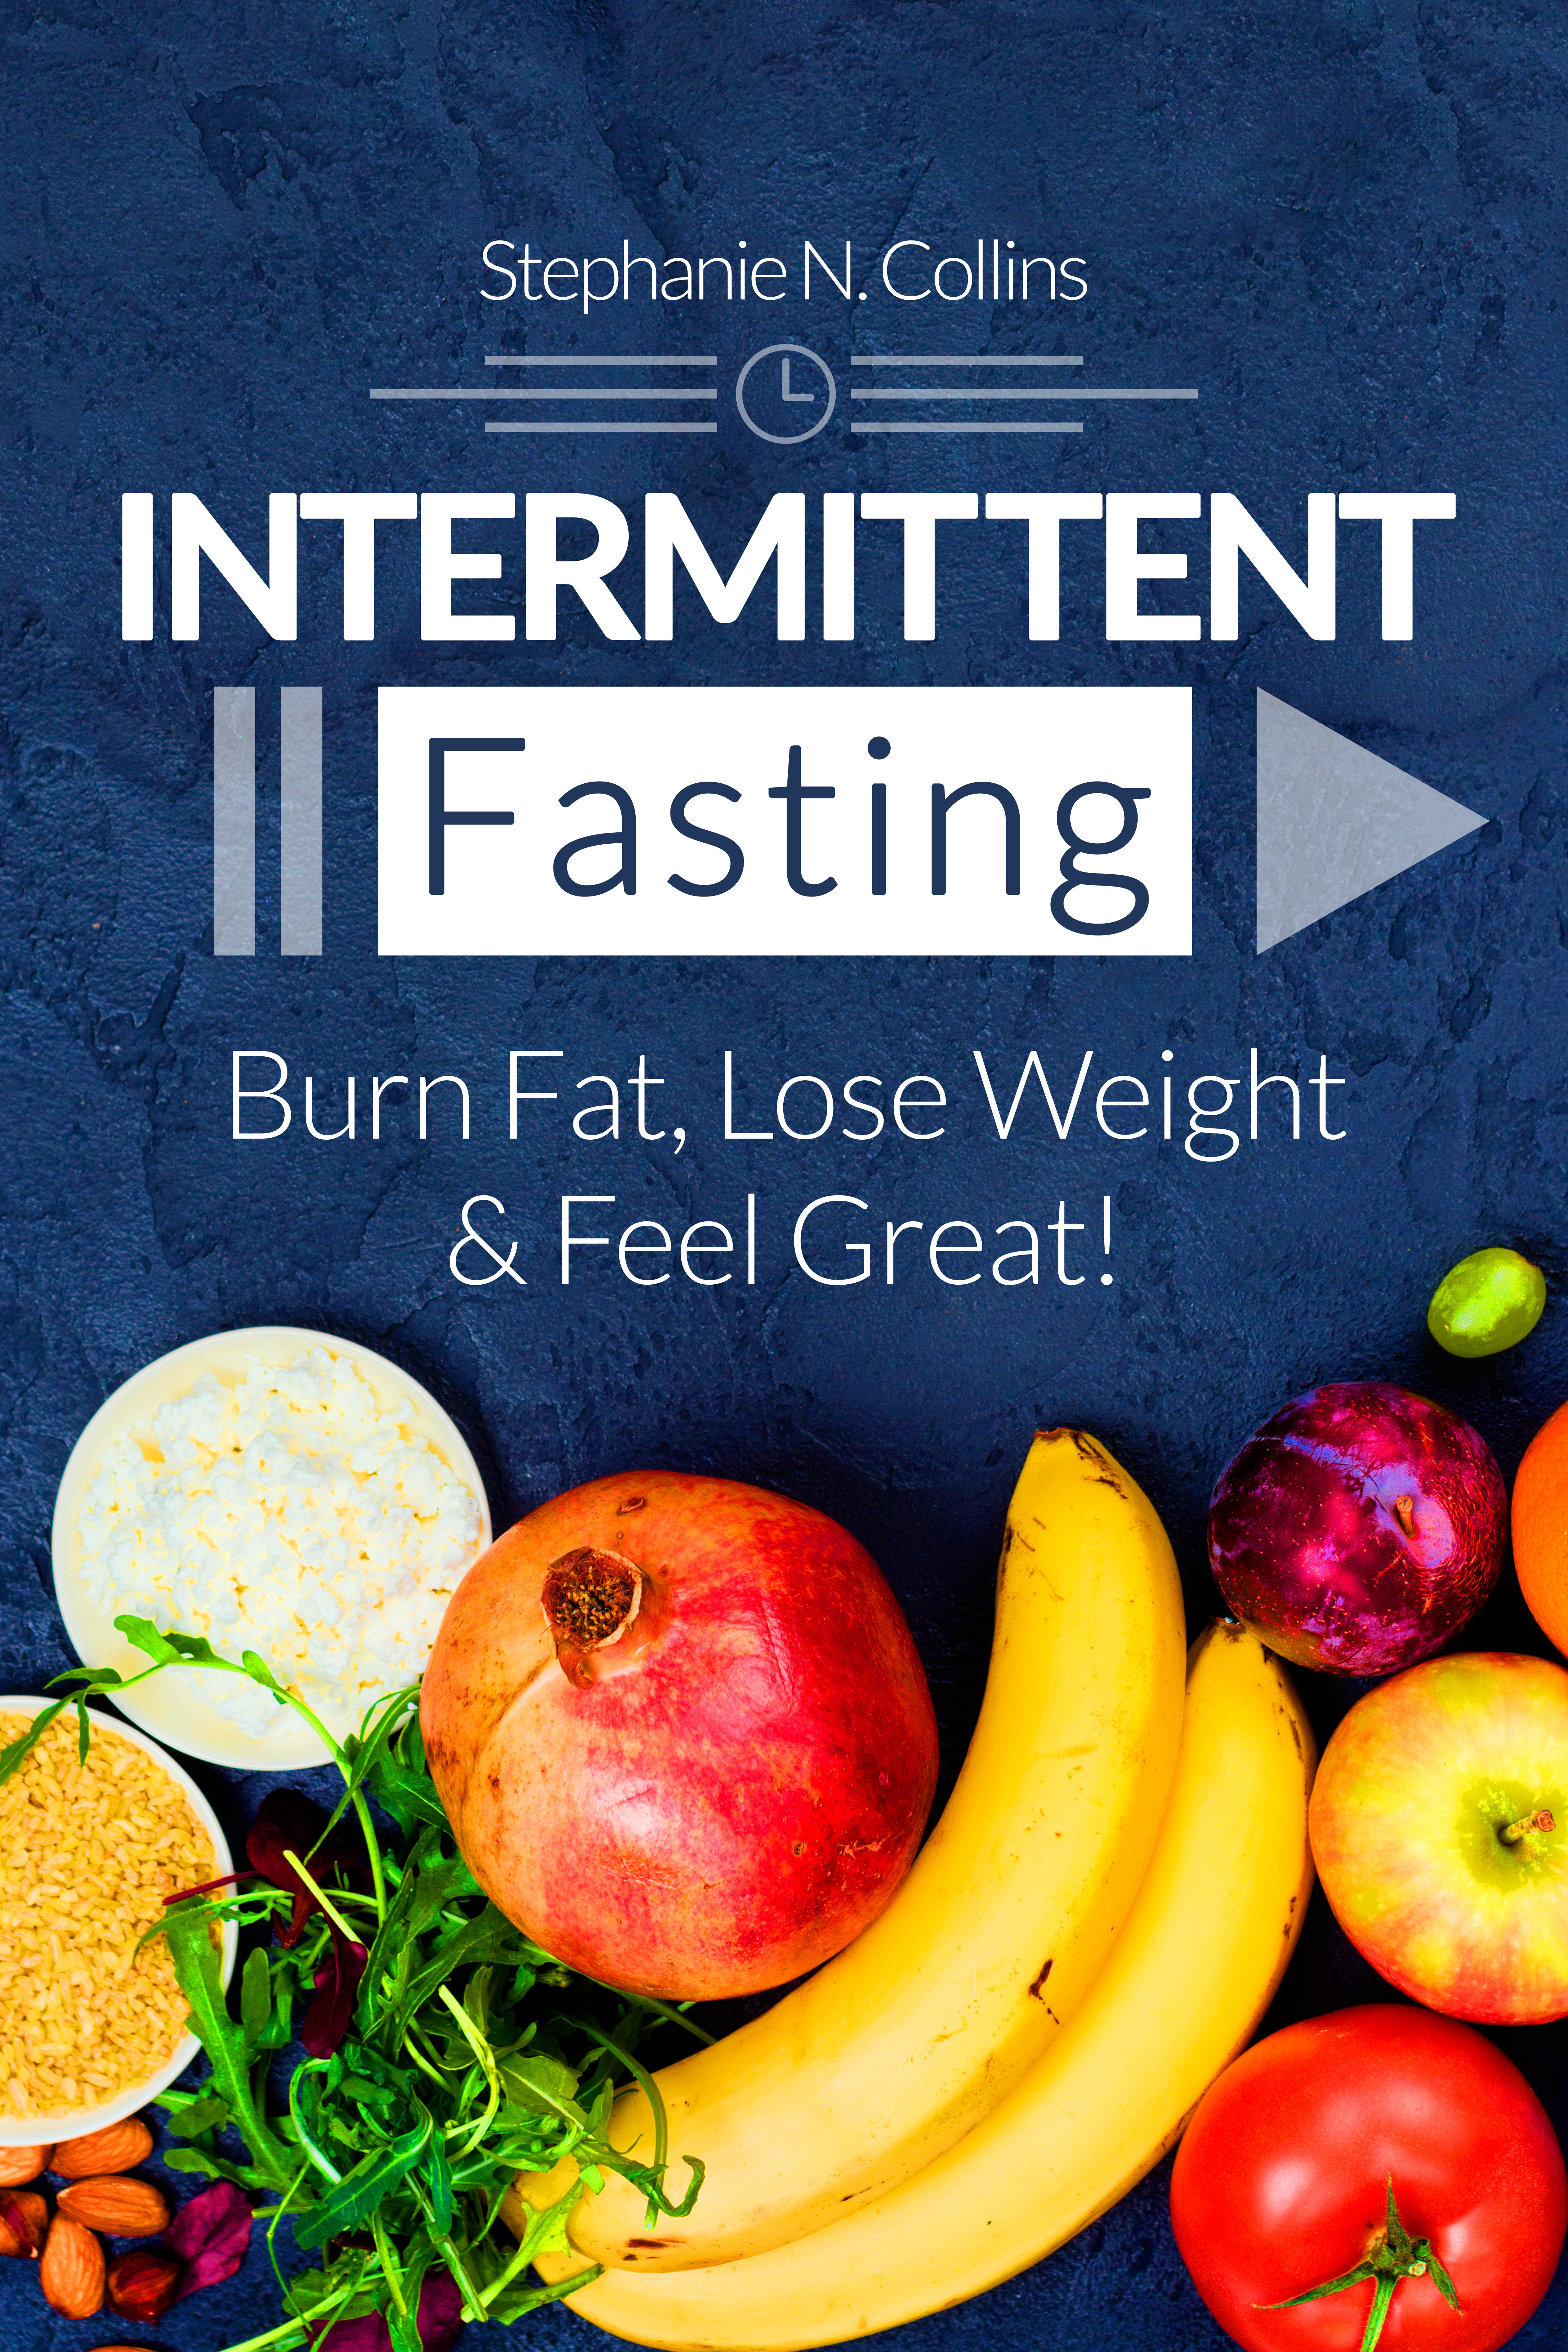 FREE: Intermittent Fasting: Burn Fat, Lose Weight and Feel Great! by Stephanie N. Collins